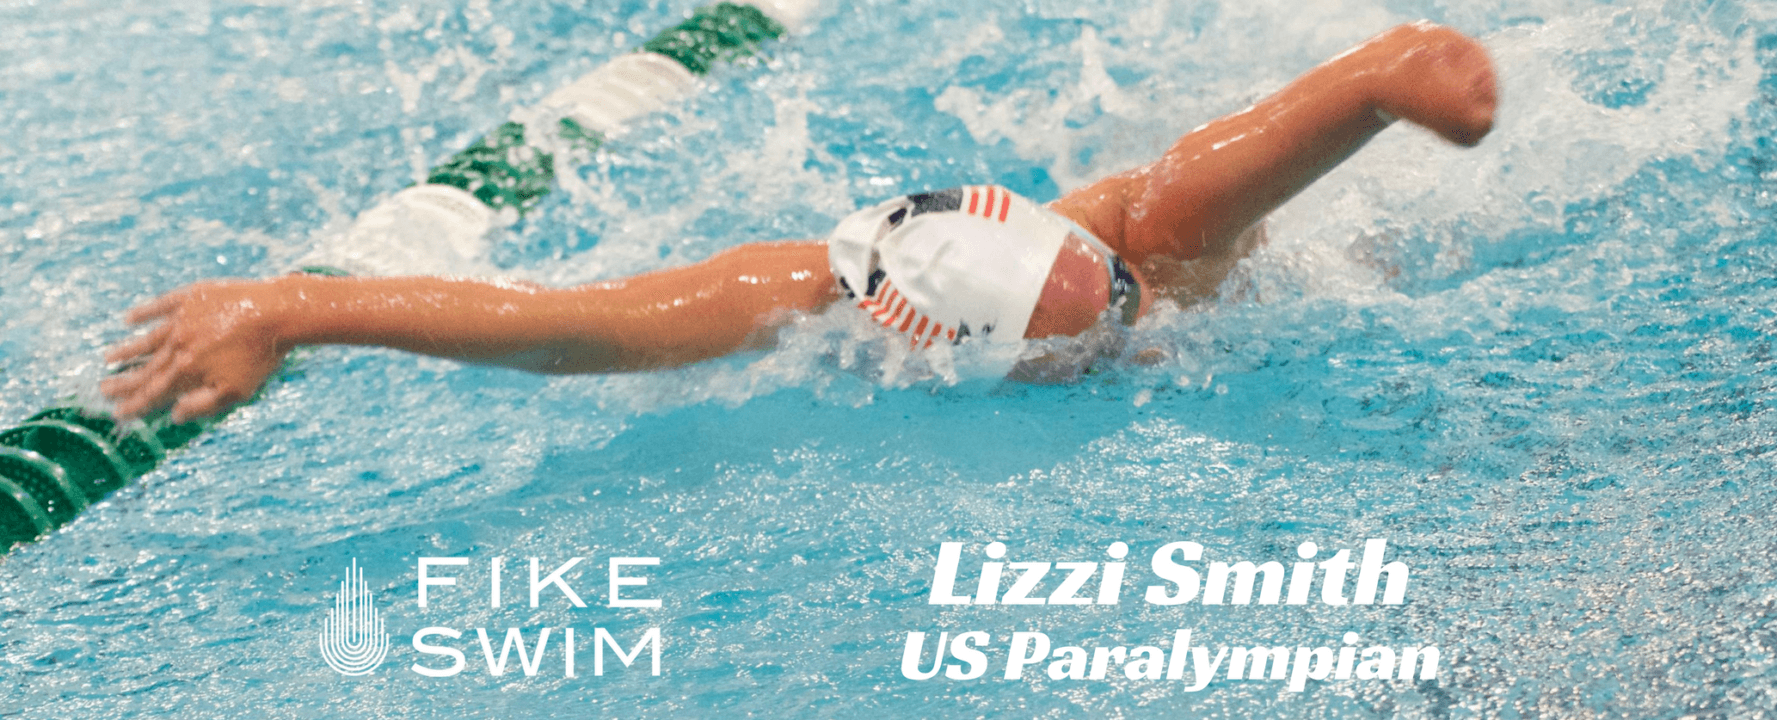 American Record Holder and US Paralympian Lizzi Smith Joins Fike Swim